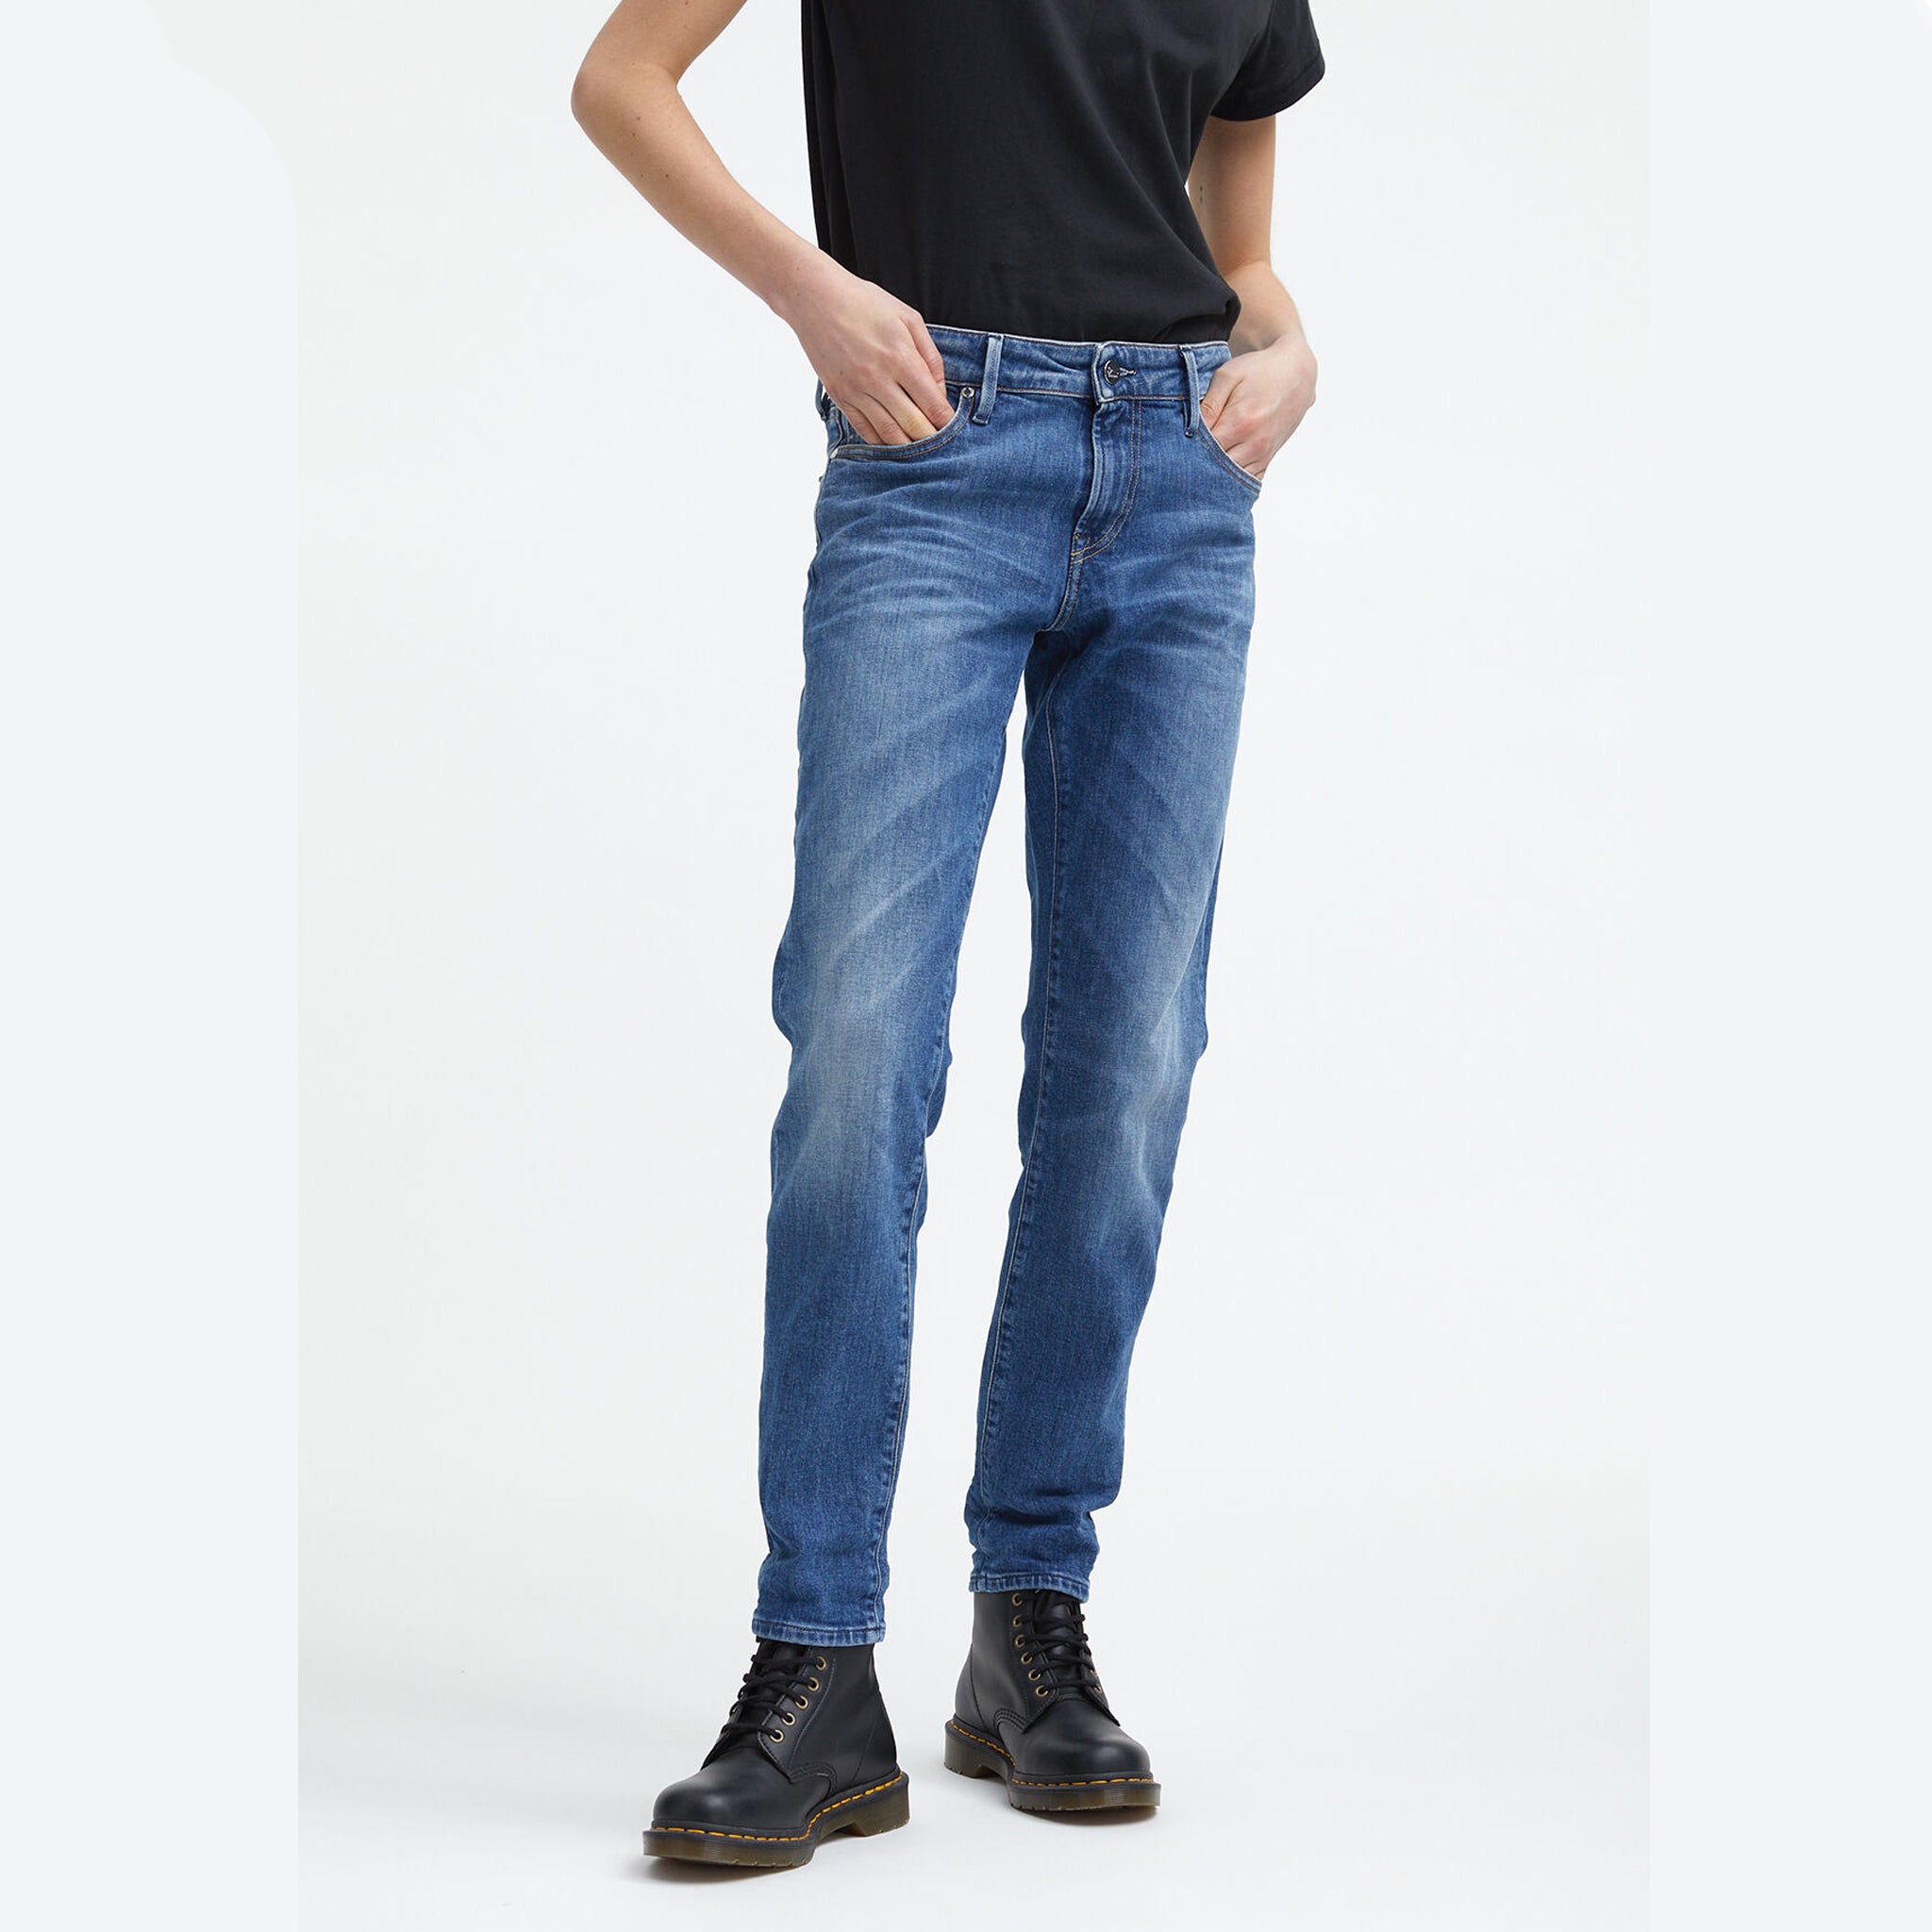 A woman wearing Denham's MONROE Mid Girlfriend - Light Fade & Whiskers Jeans, paired with a black t-shirt.